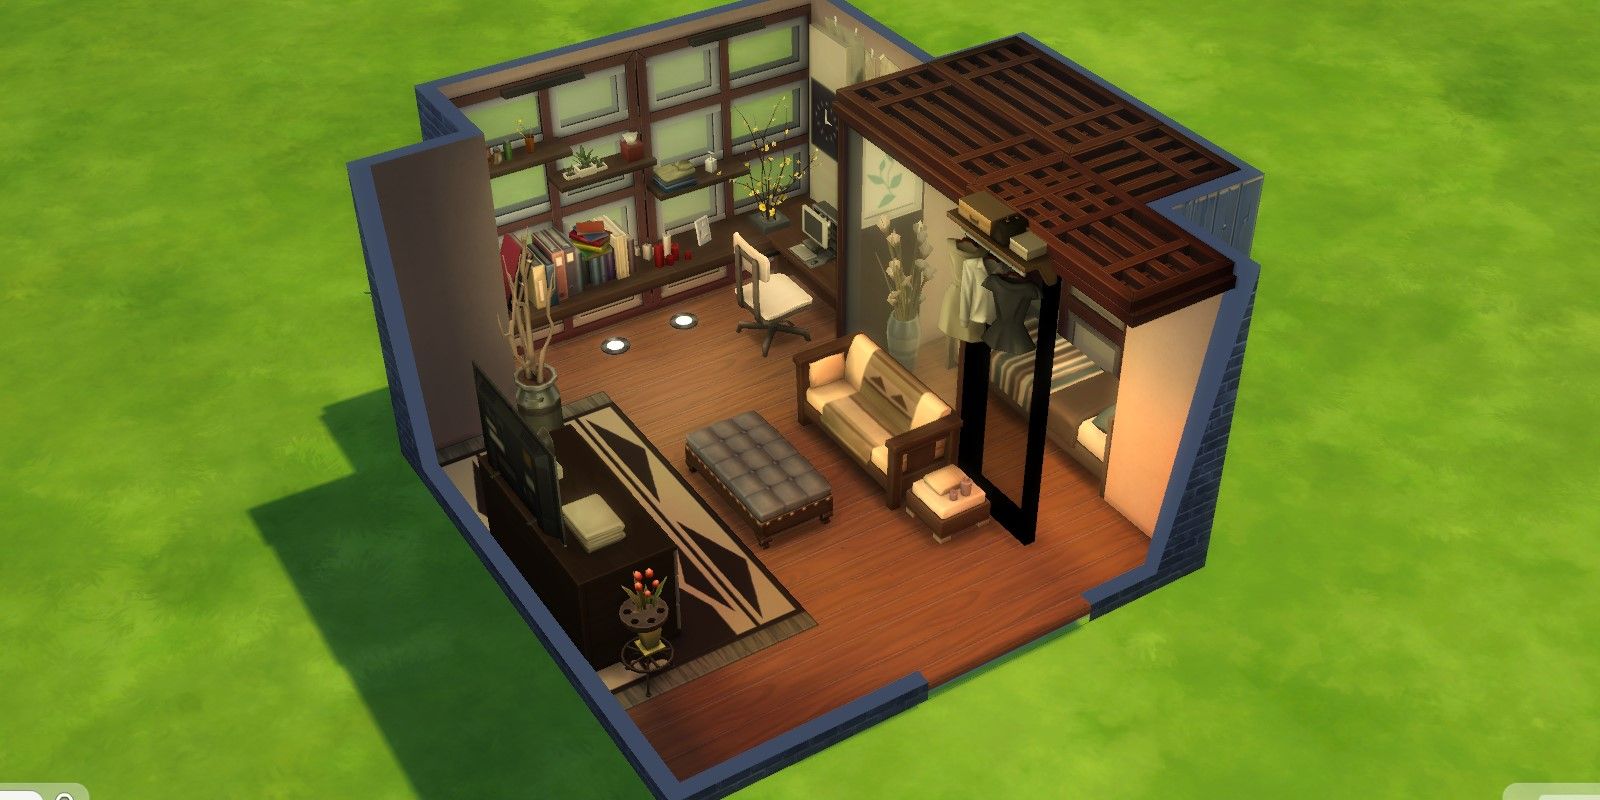 The Sims 4 Warm Wooden Bedroom